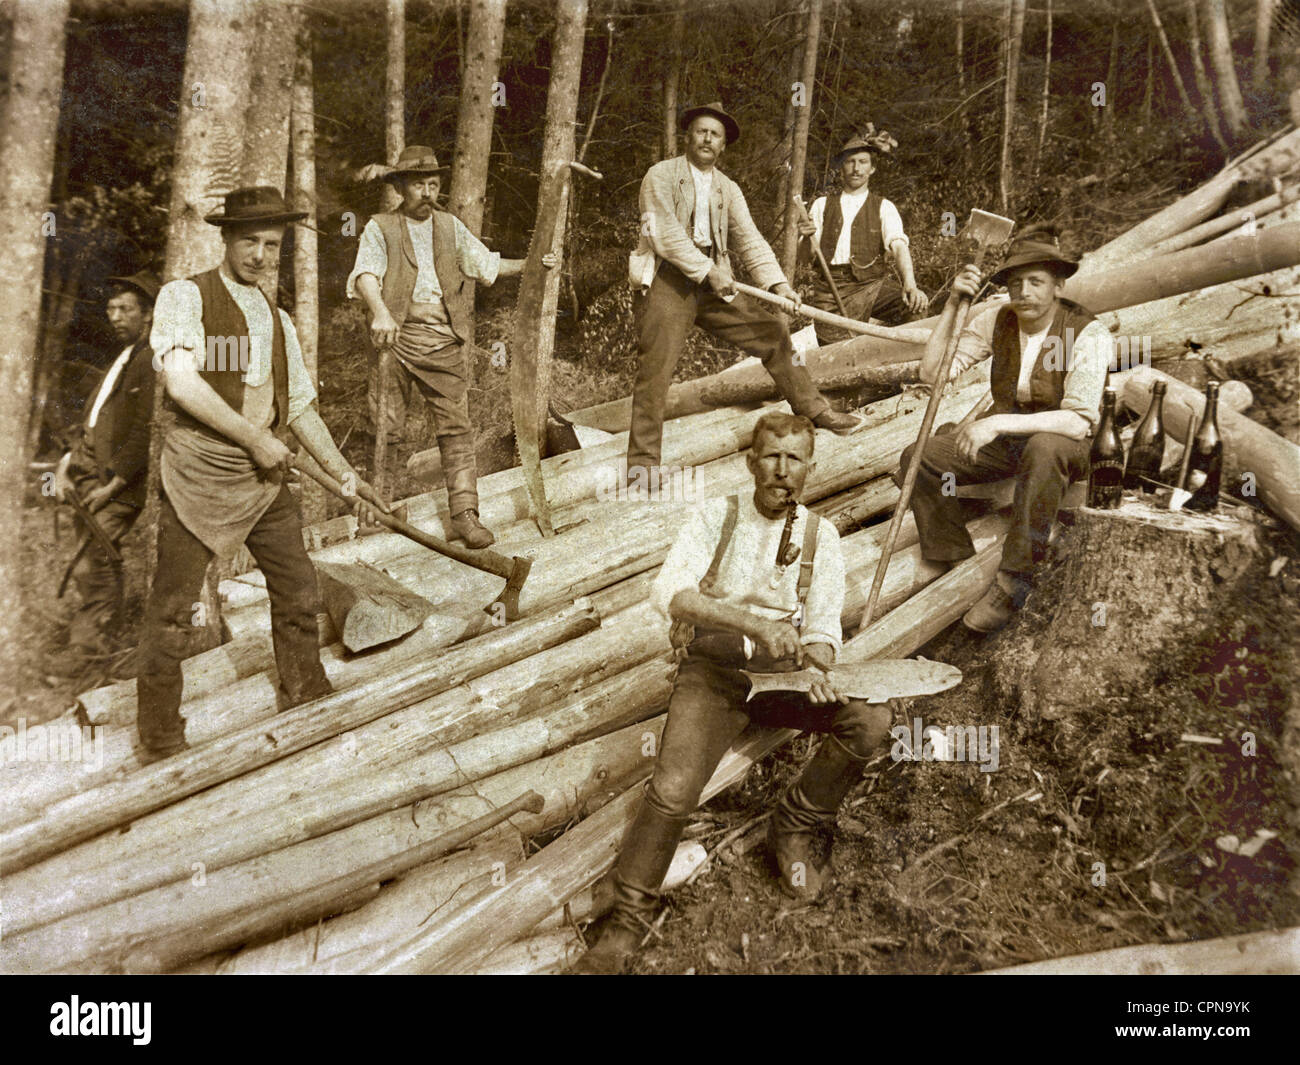 agriculture, forest, lumberman, group picture, Bavaria, Germany, circa 1910, Additional-Rights-Clearences-Not Available Stock Photo